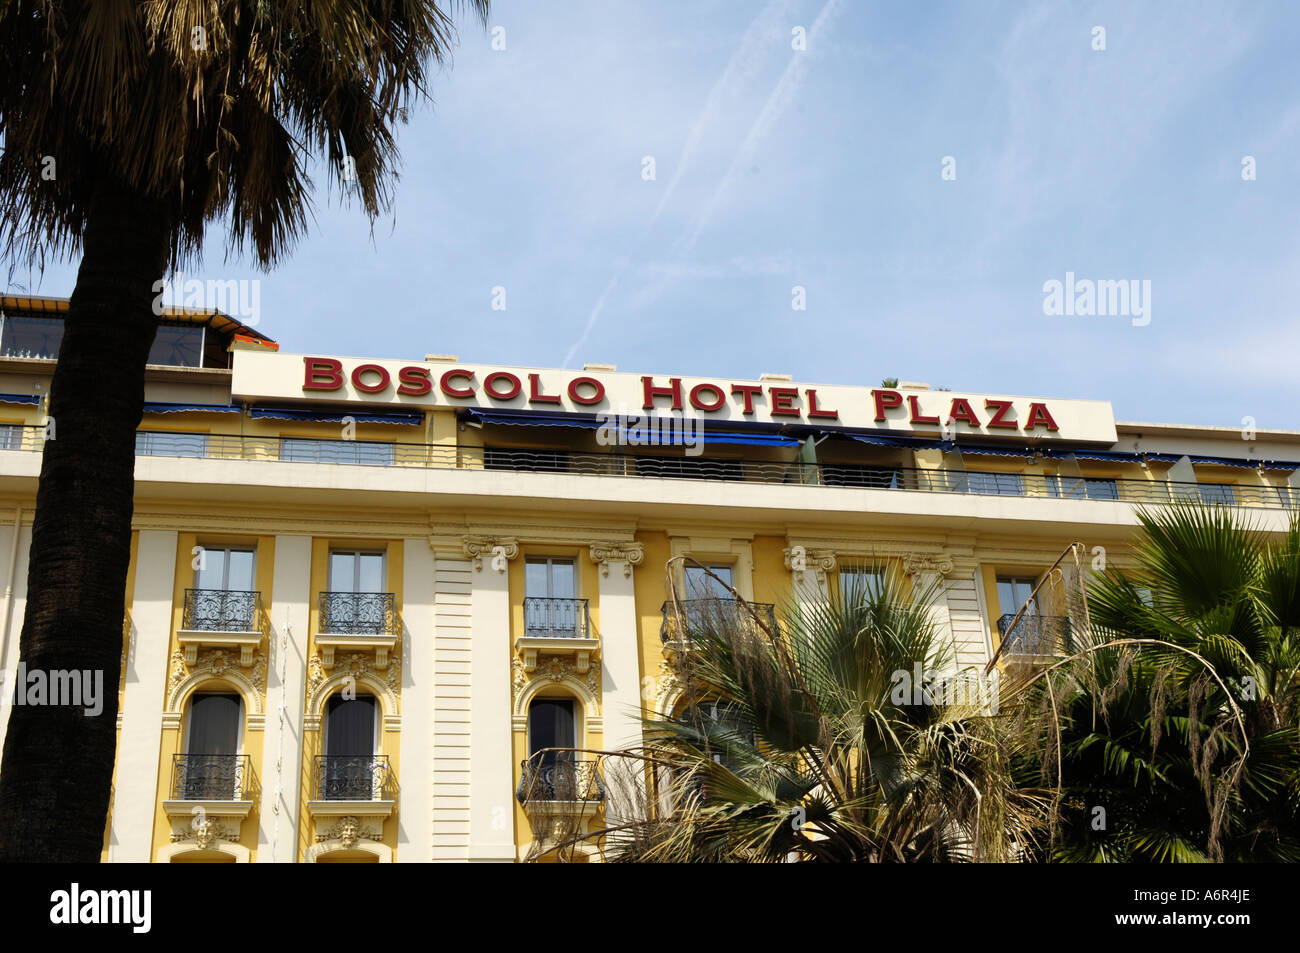 Boscolo Hotel Plaza High Resolution Stock Photography And Images Alamy